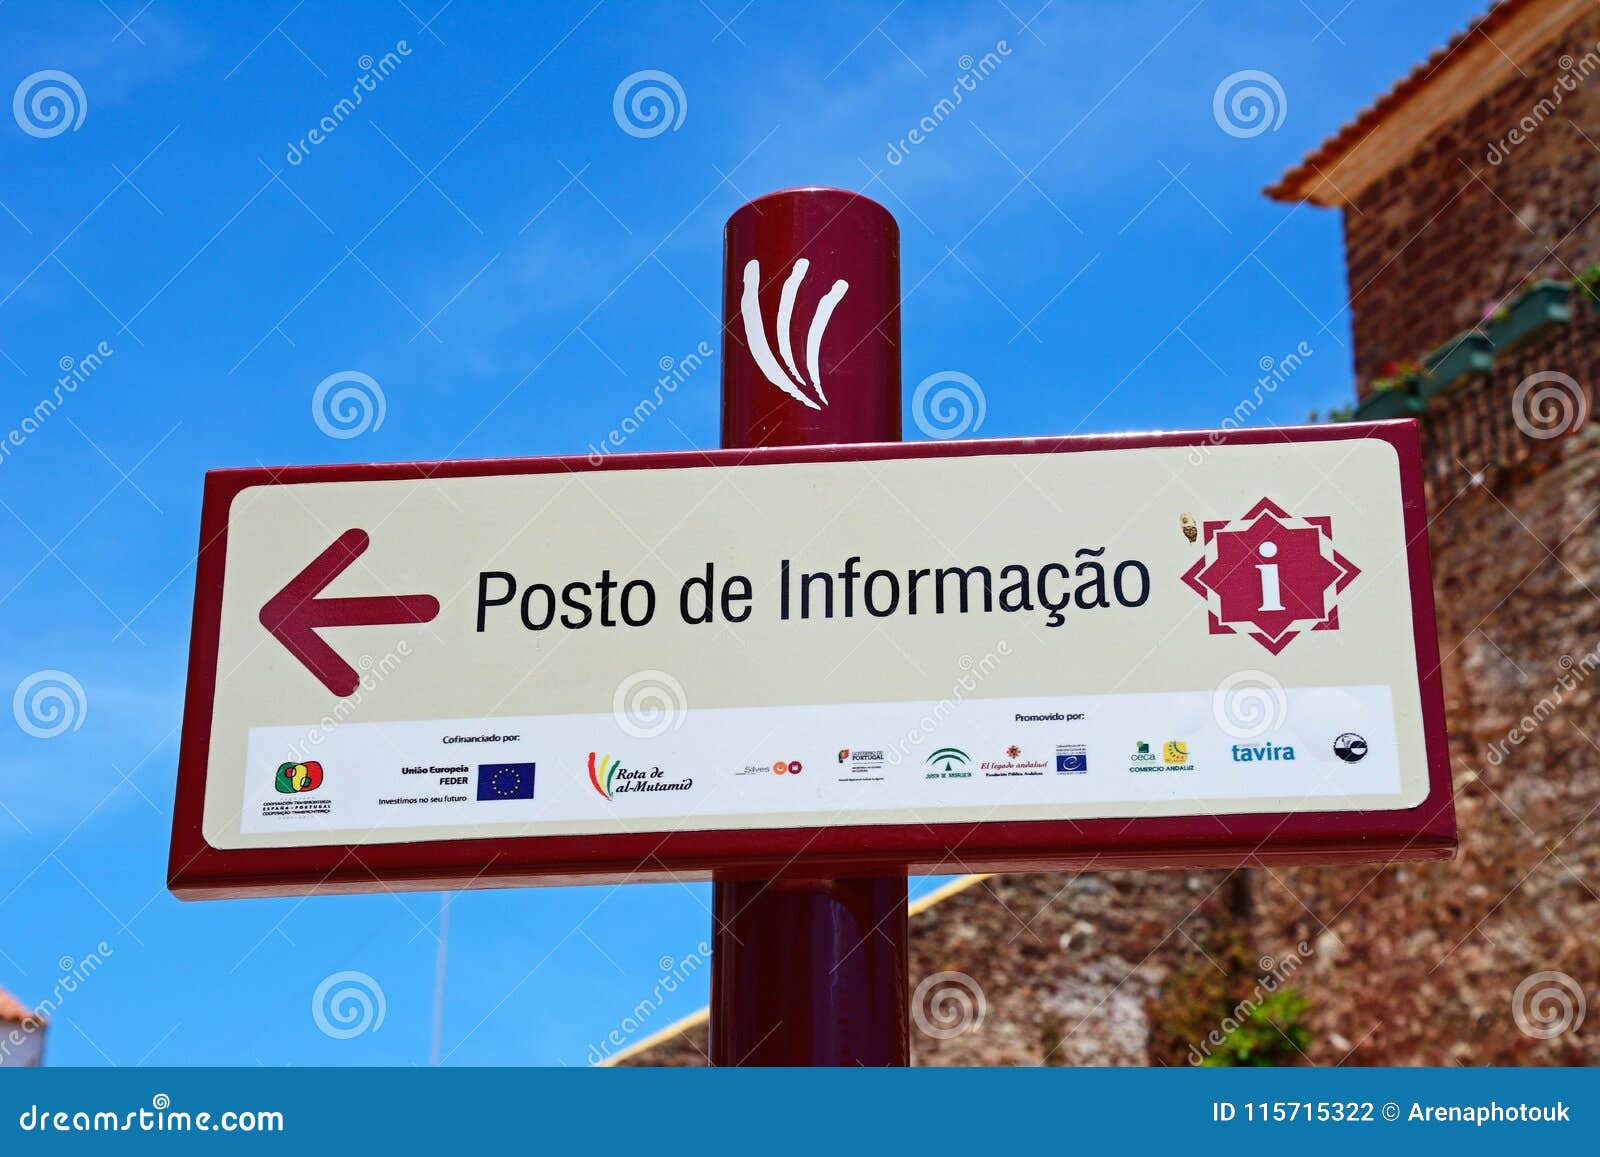 silves tourist information office